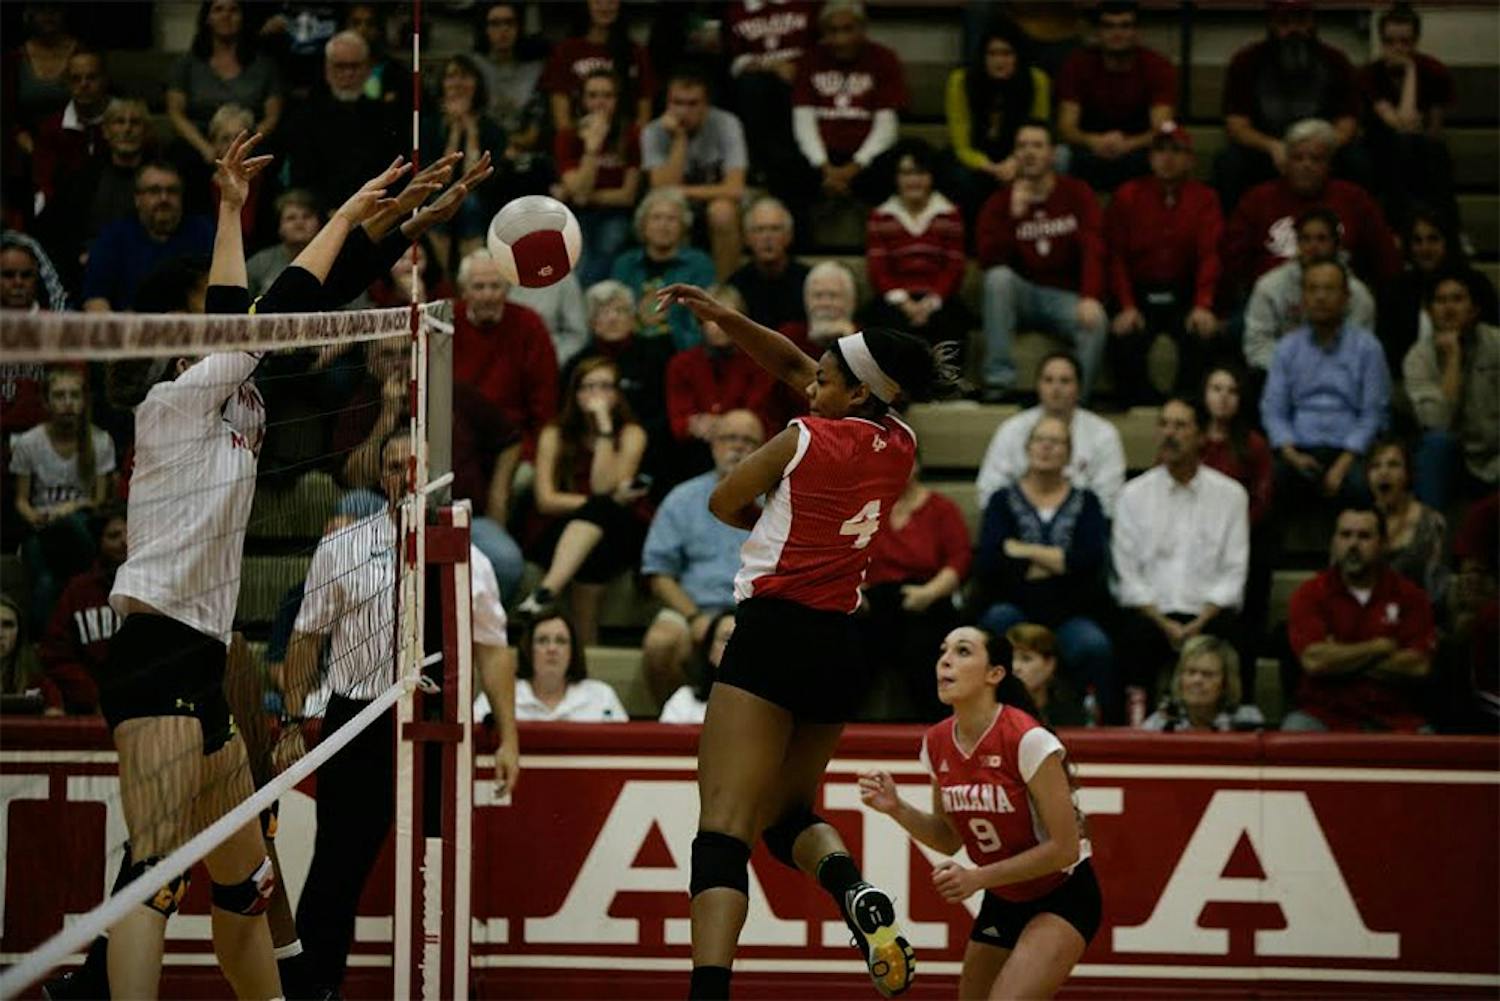 Redshirt senior Chanté George spikes the ball during a game against Maryland on Friday night. The Hoosiers won 3-1.